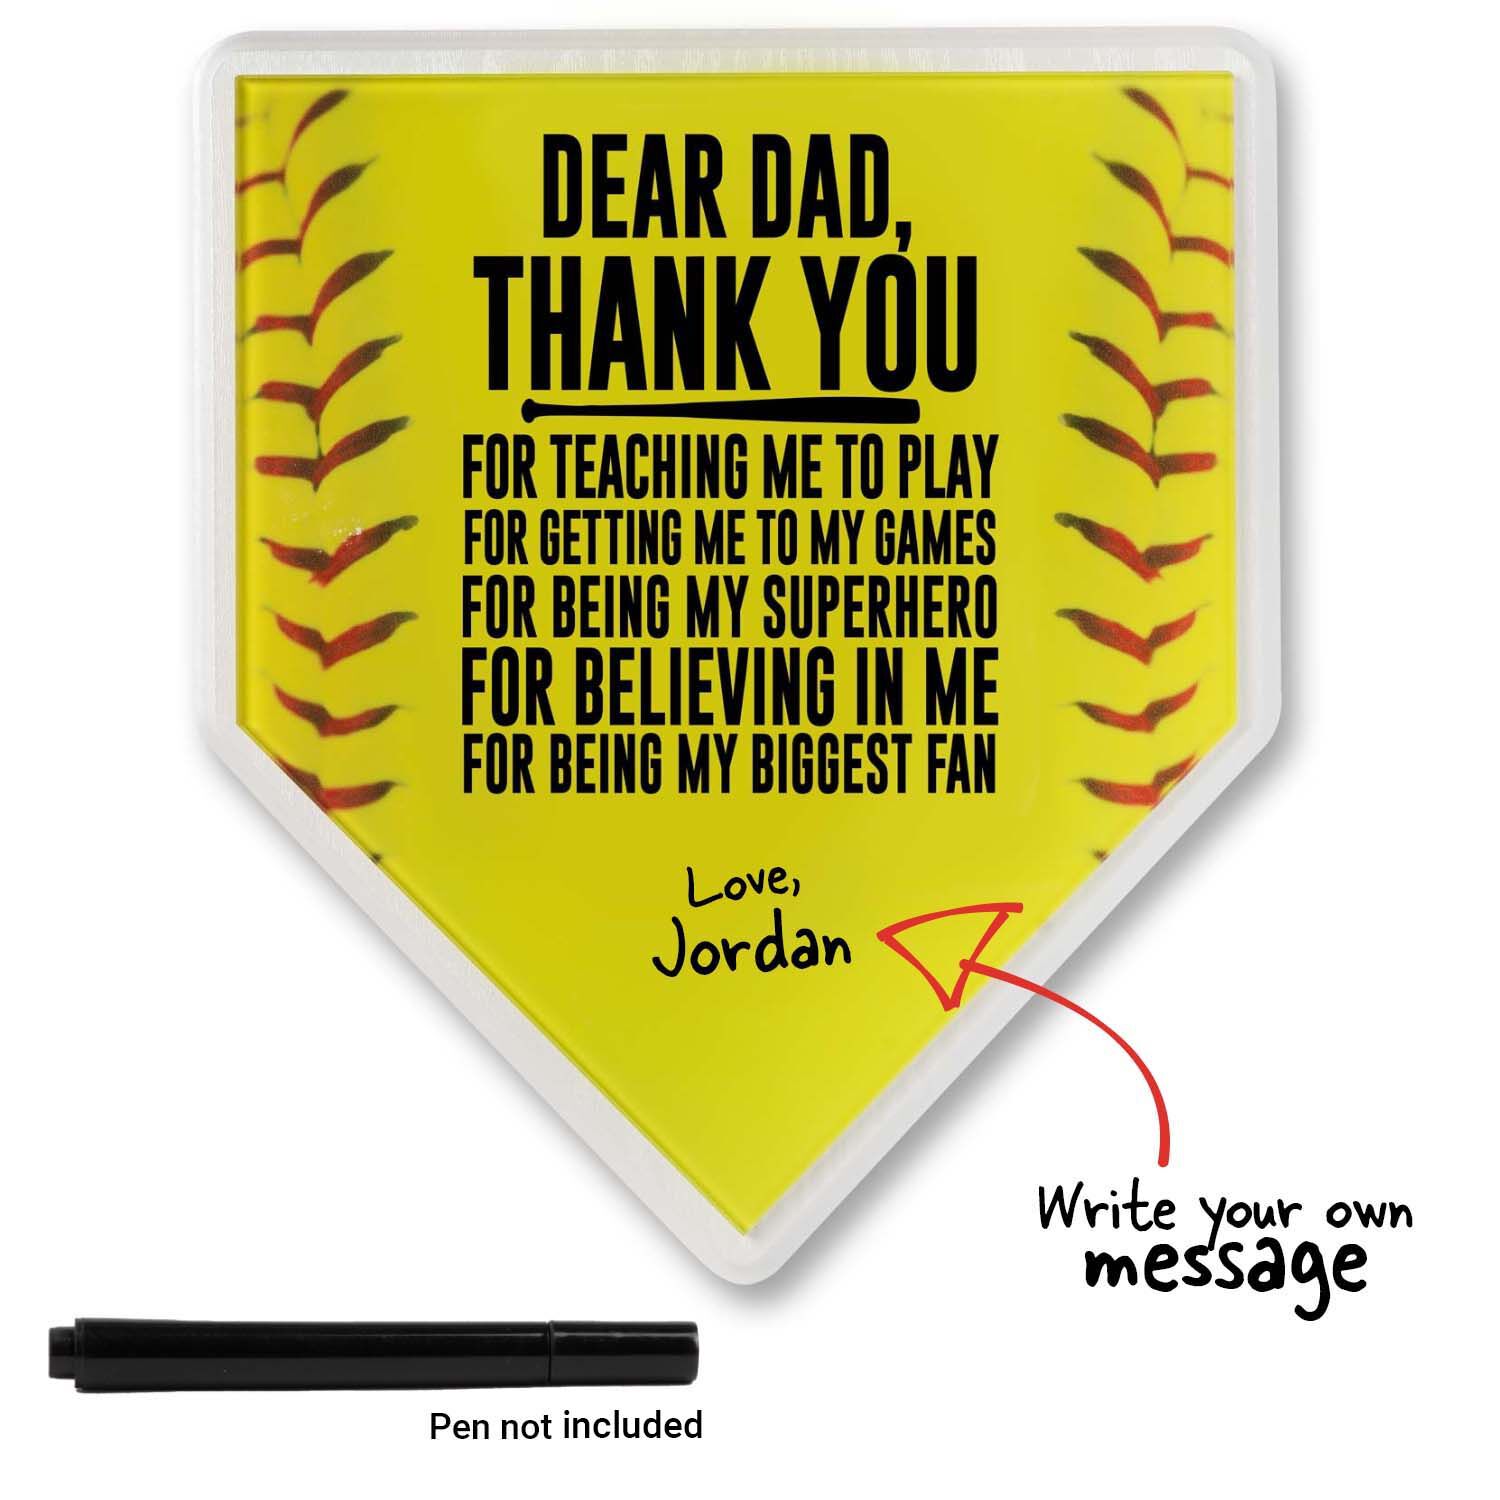 ChalkTalkSPORTS Softball Stitches Home Plate Plaque Your Message to Dad Ready to Autograph 